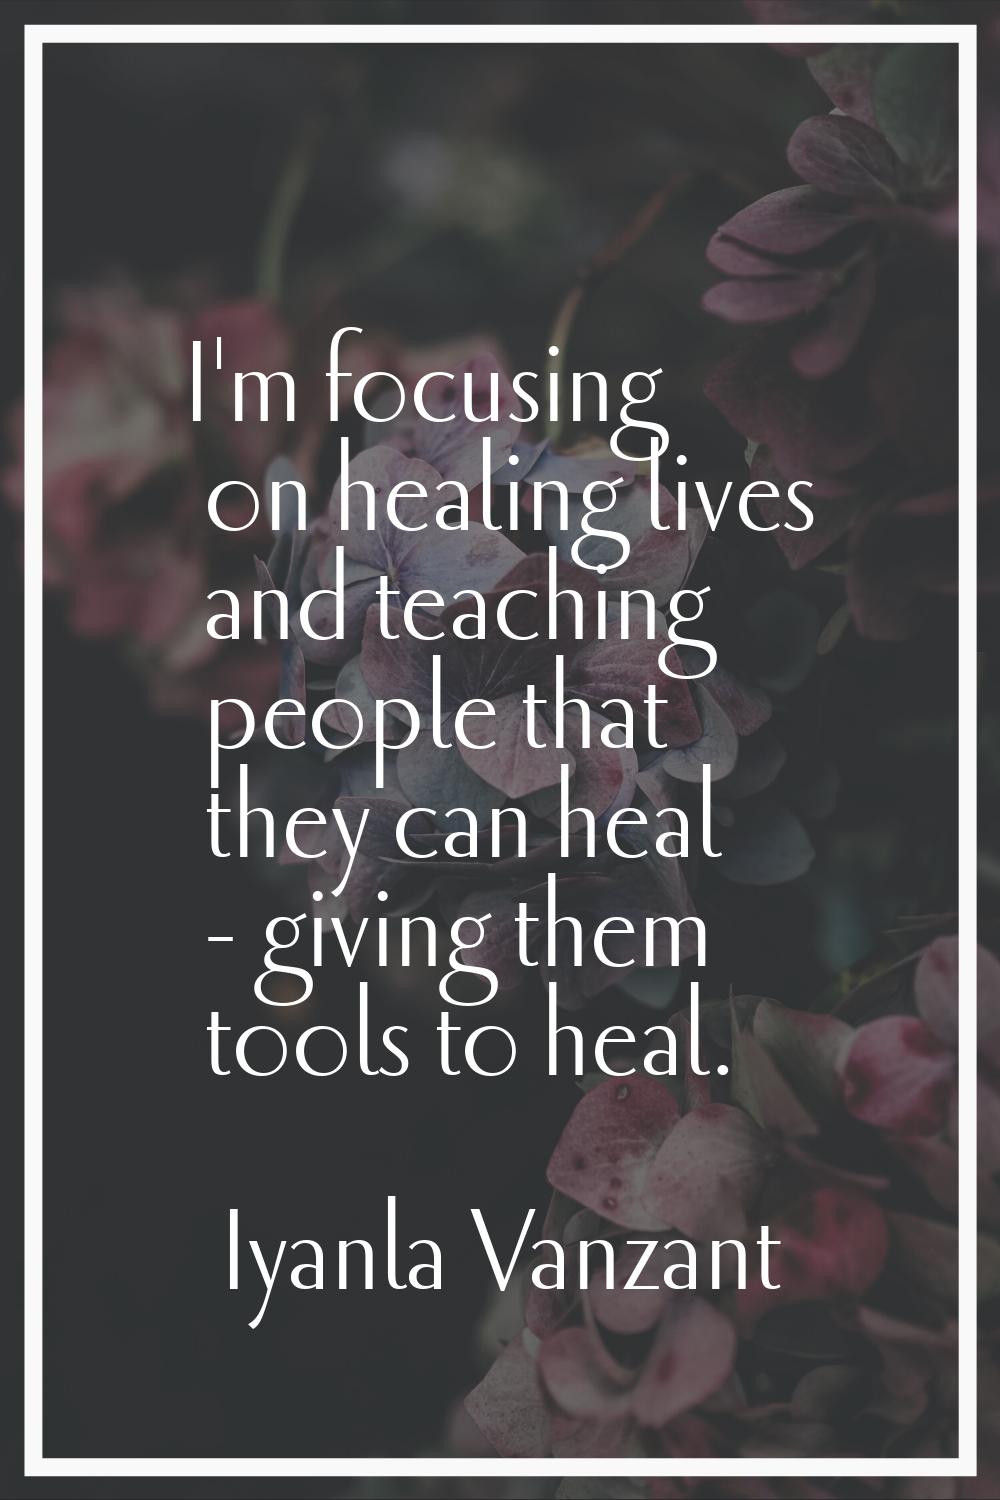 I'm focusing on healing lives and teaching people that they can heal - giving them tools to heal.